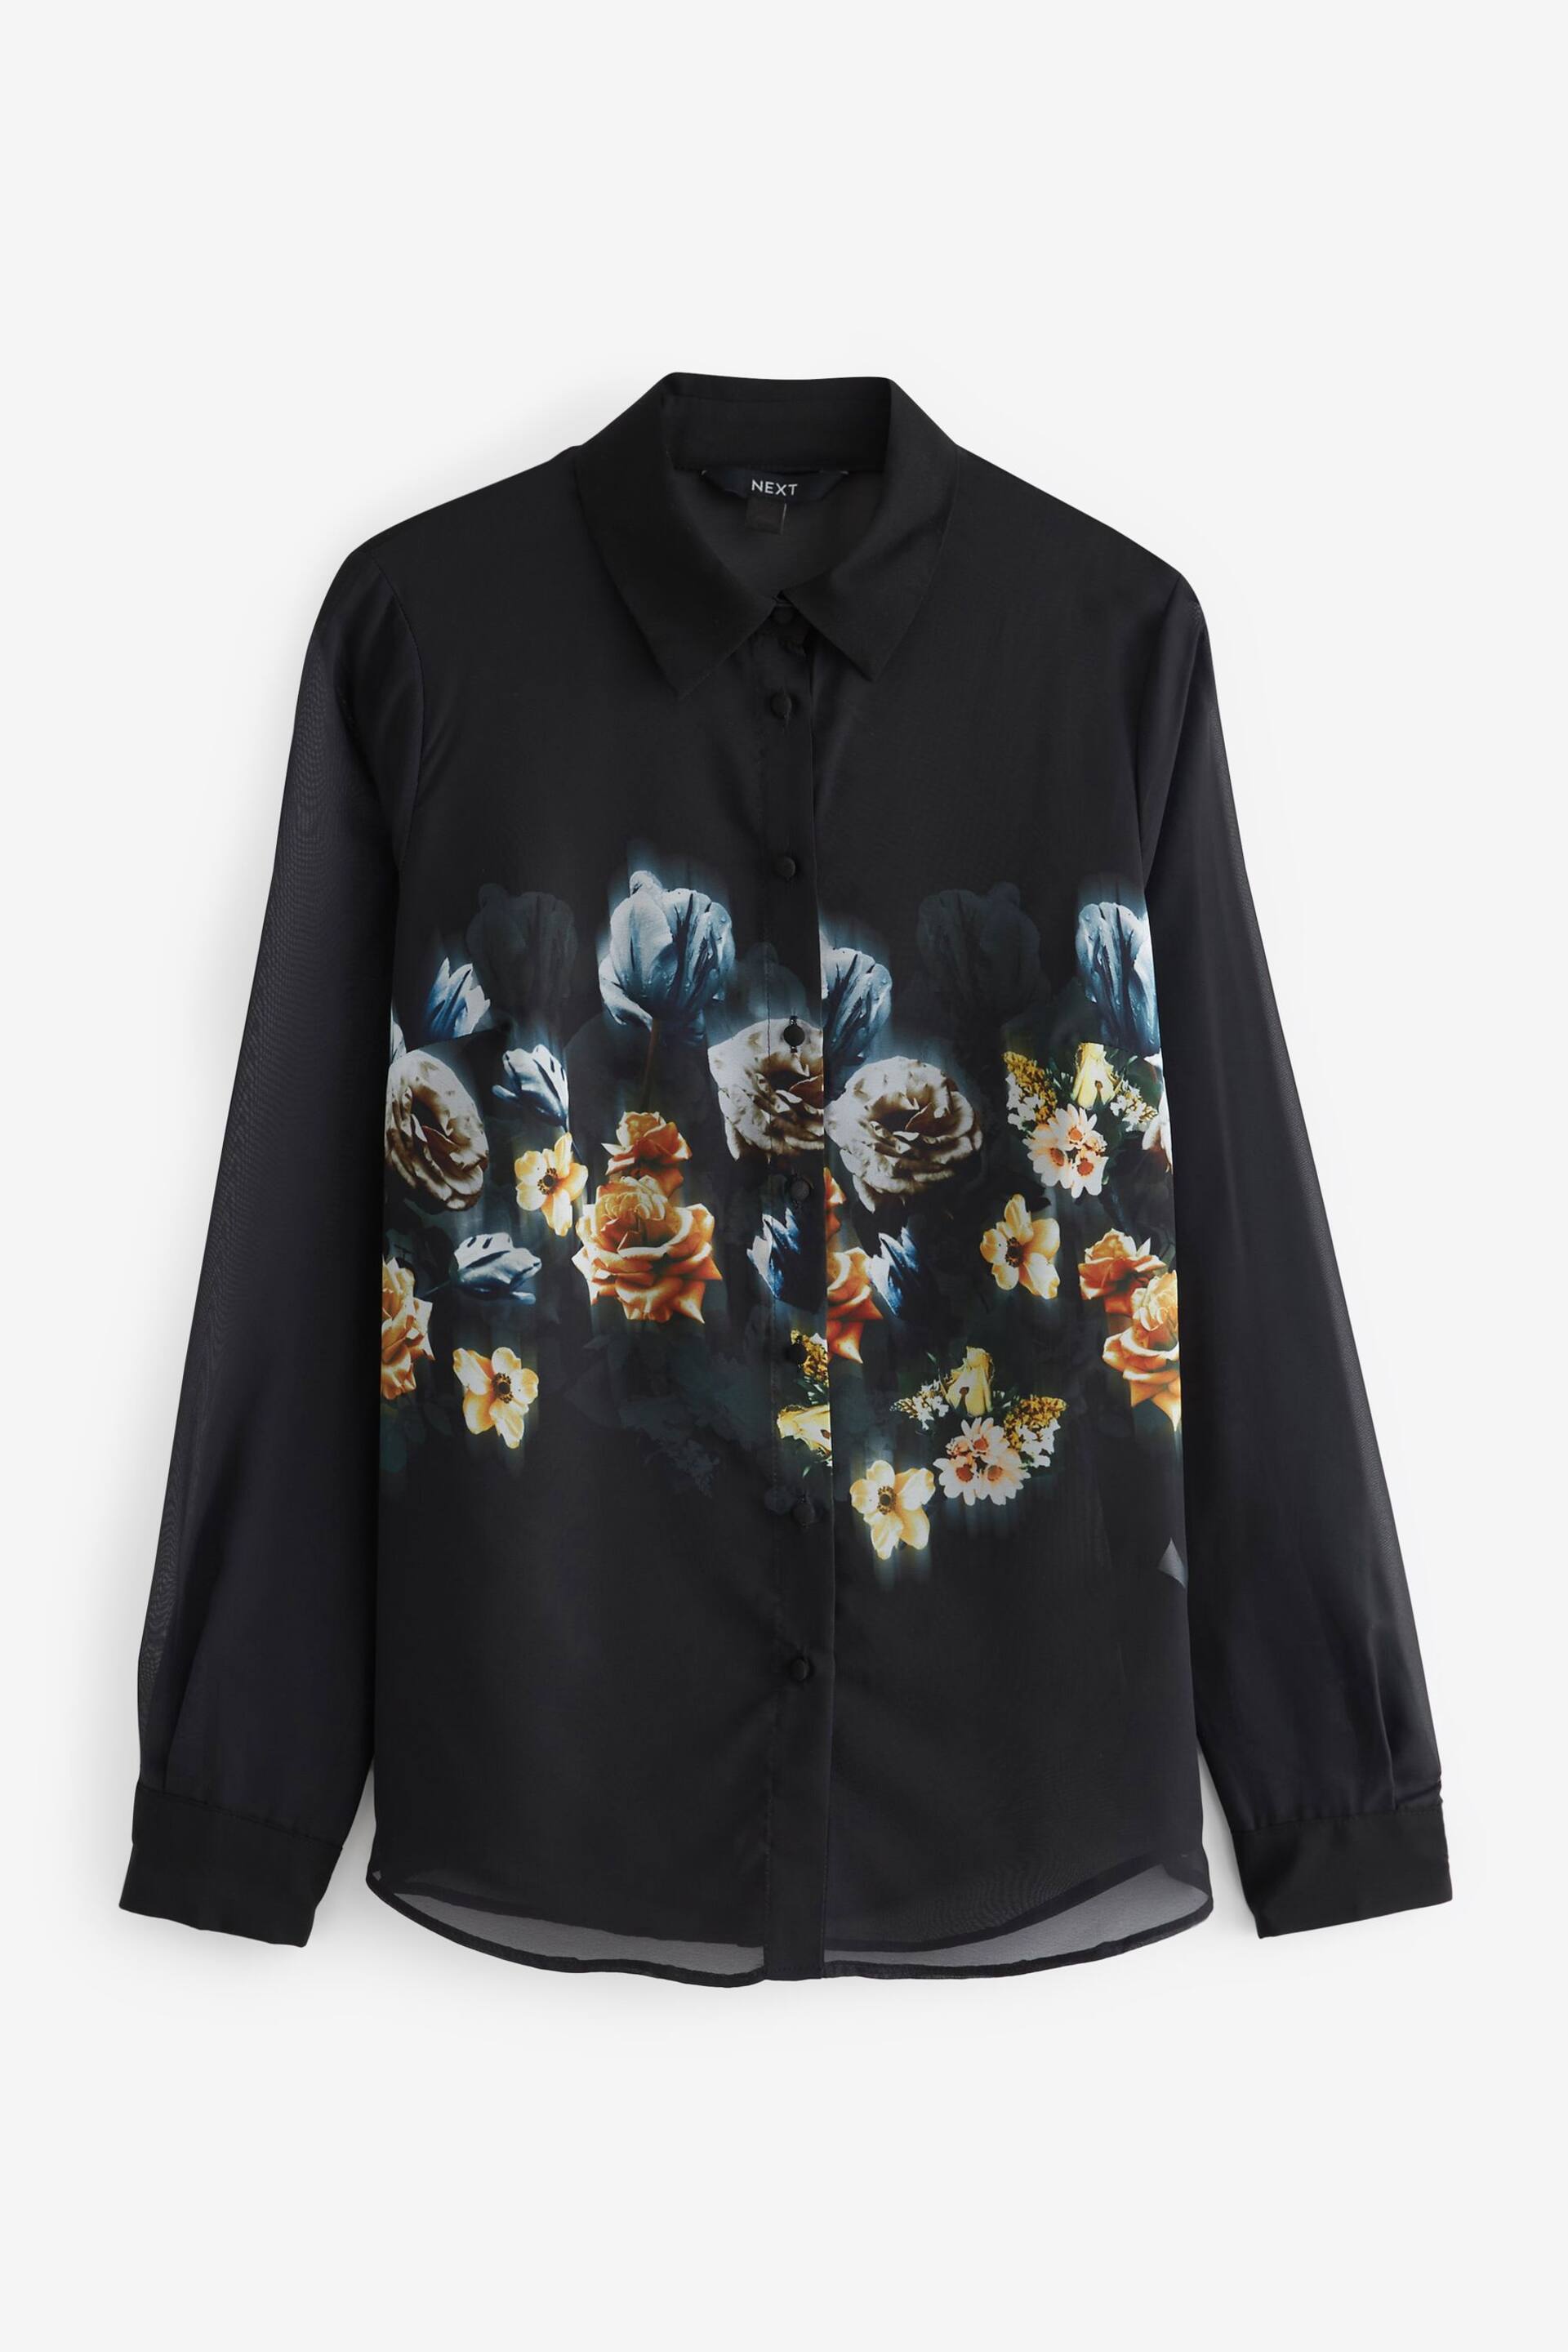 Black Floral Placement Print Long Sleeve Sheer Shirt - Image 5 of 6